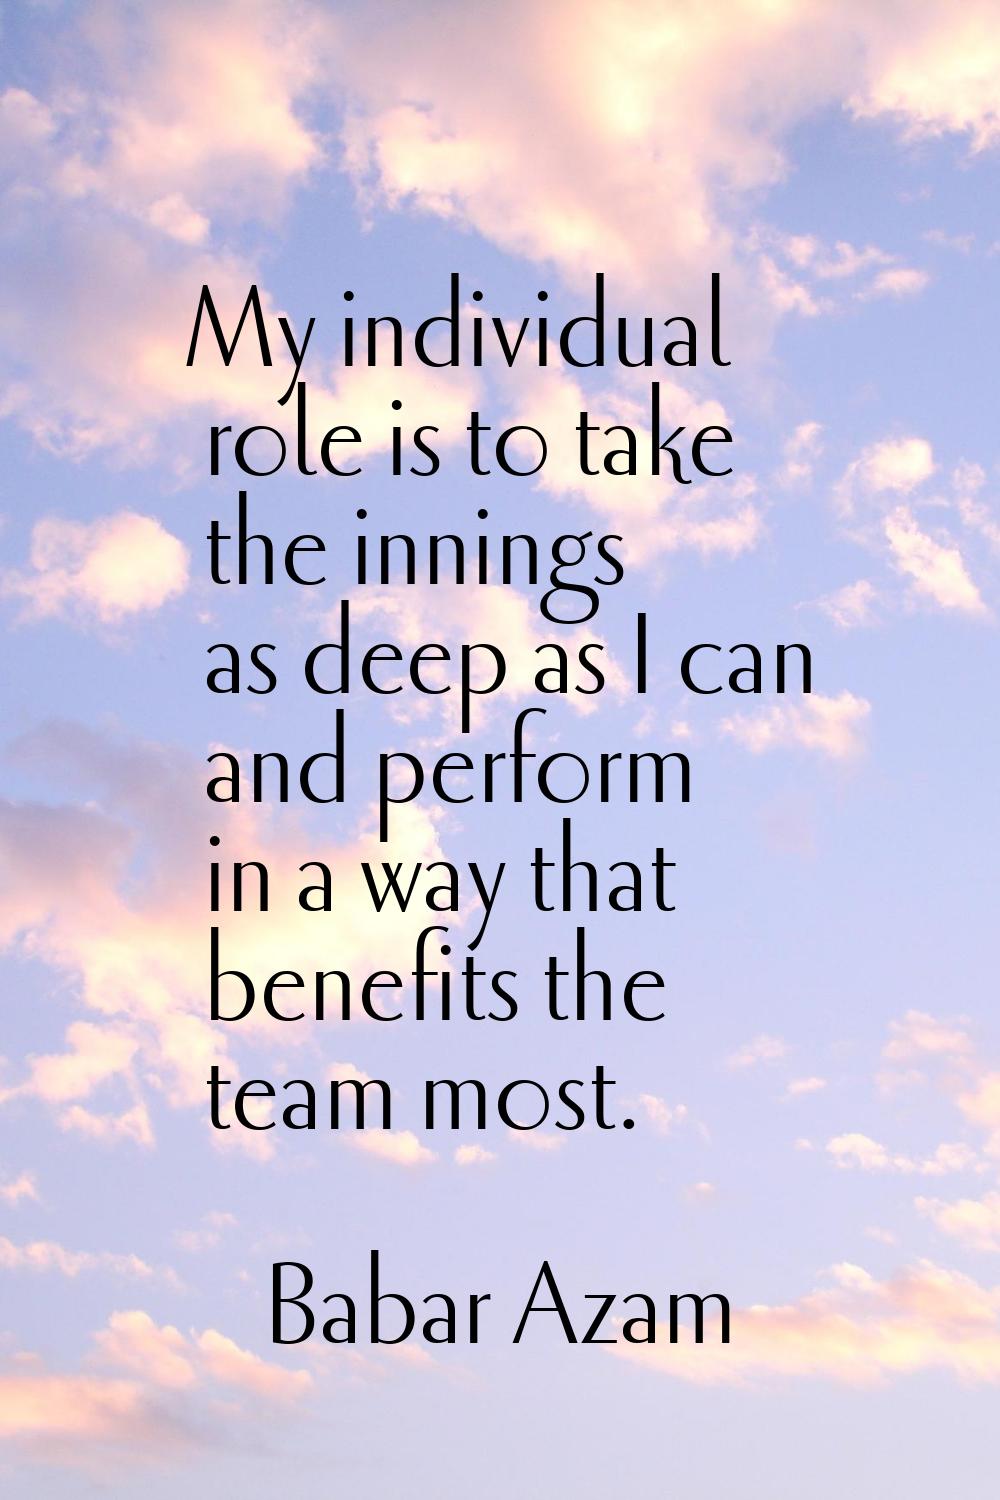 My individual role is to take the innings as deep as I can and perform in a way that benefits the t